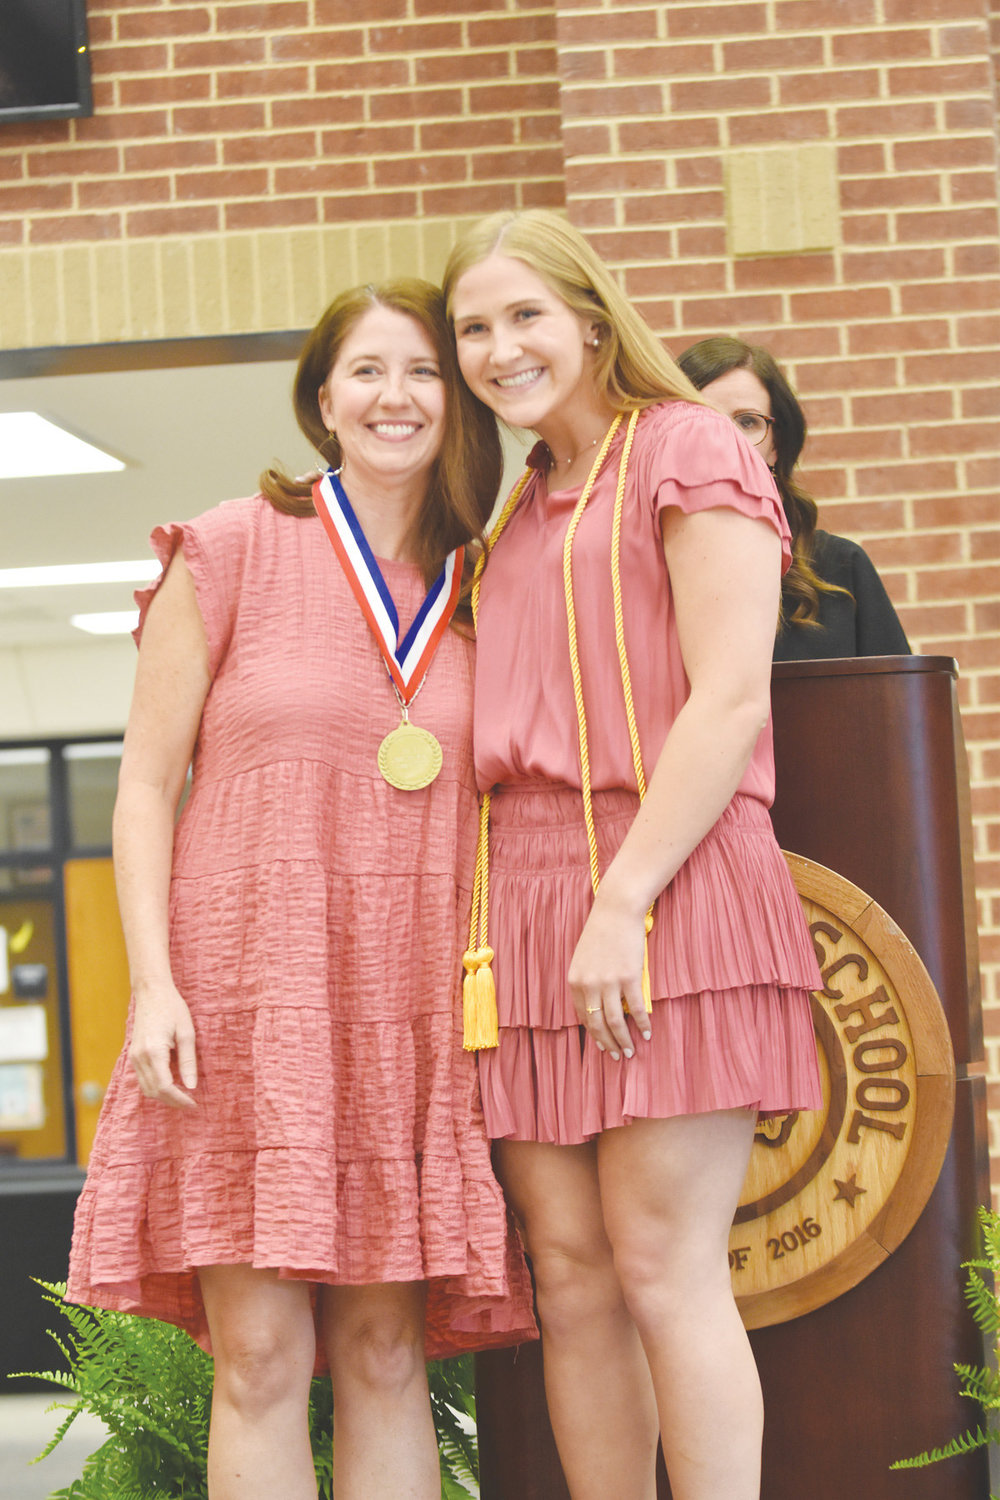 Josephine Harvey is the daughter of William and Kate Harvey. Her plans are to attend Texas A&M University and major in nurse anesthesia. She honored Mrs. Jenni Meador.